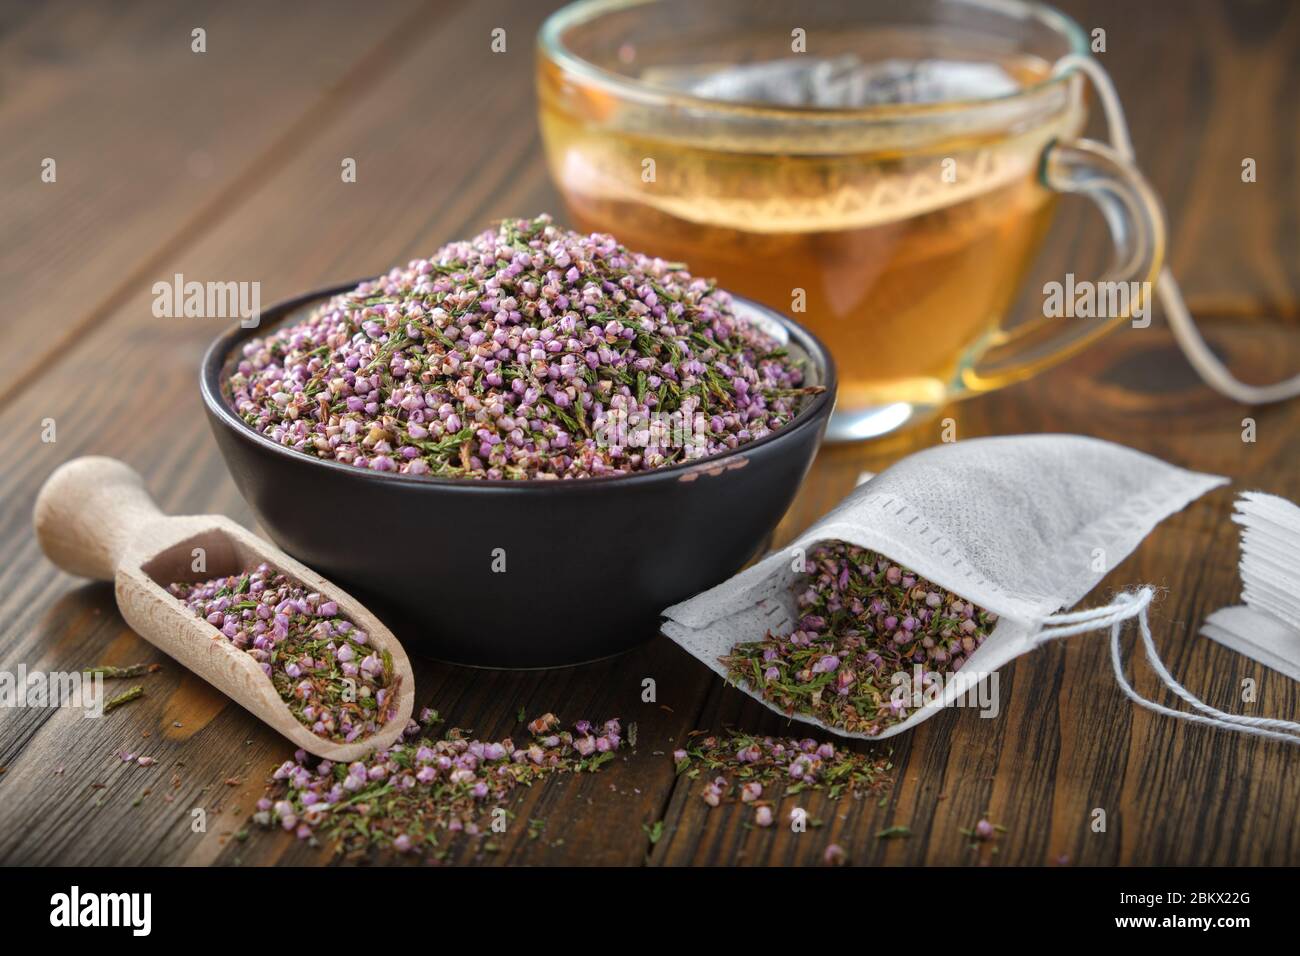 Bowl of dry healthy heather, tea bag with Еrica flowers. Glass tea cup with herbal teabag inside on wooden table. Herbal medicine. Stock Photo